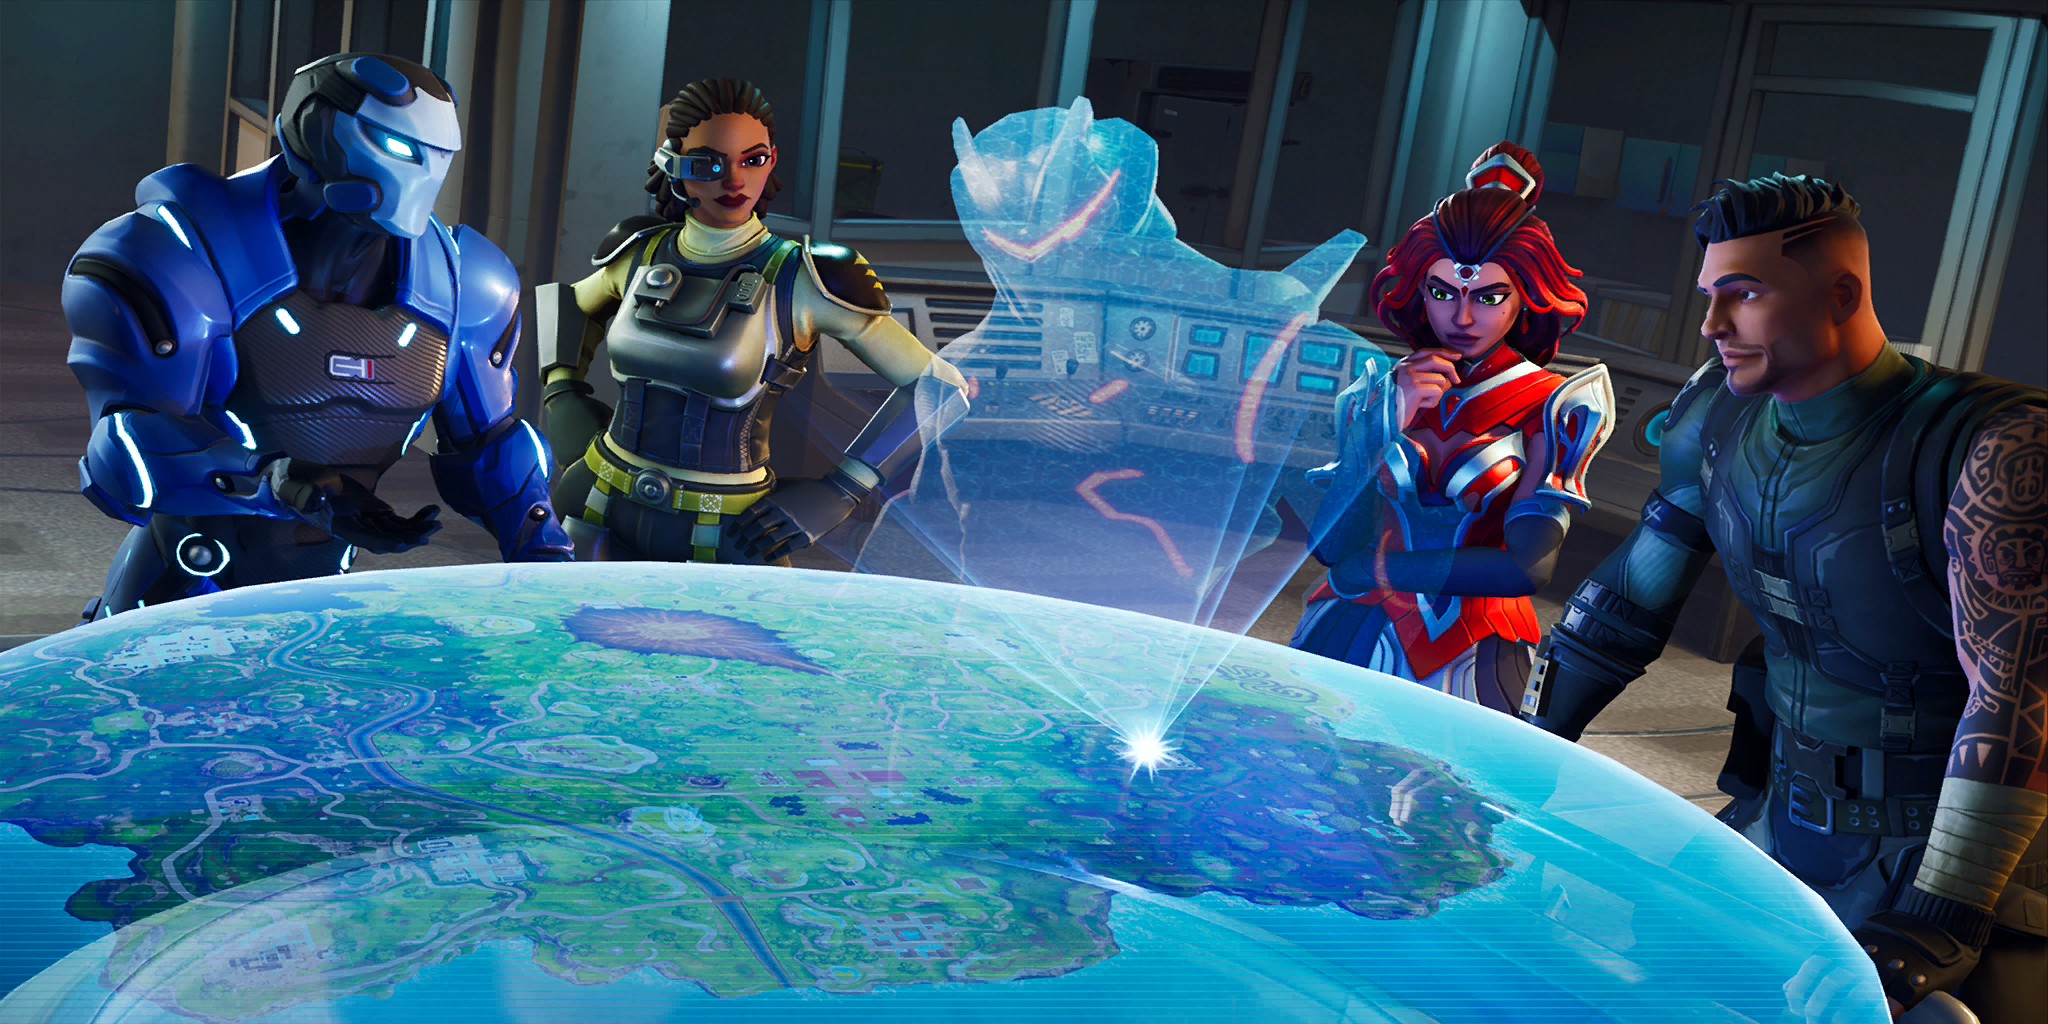 New Leak Points To Guardians Of The Galaxy Skin Set In Fortnite